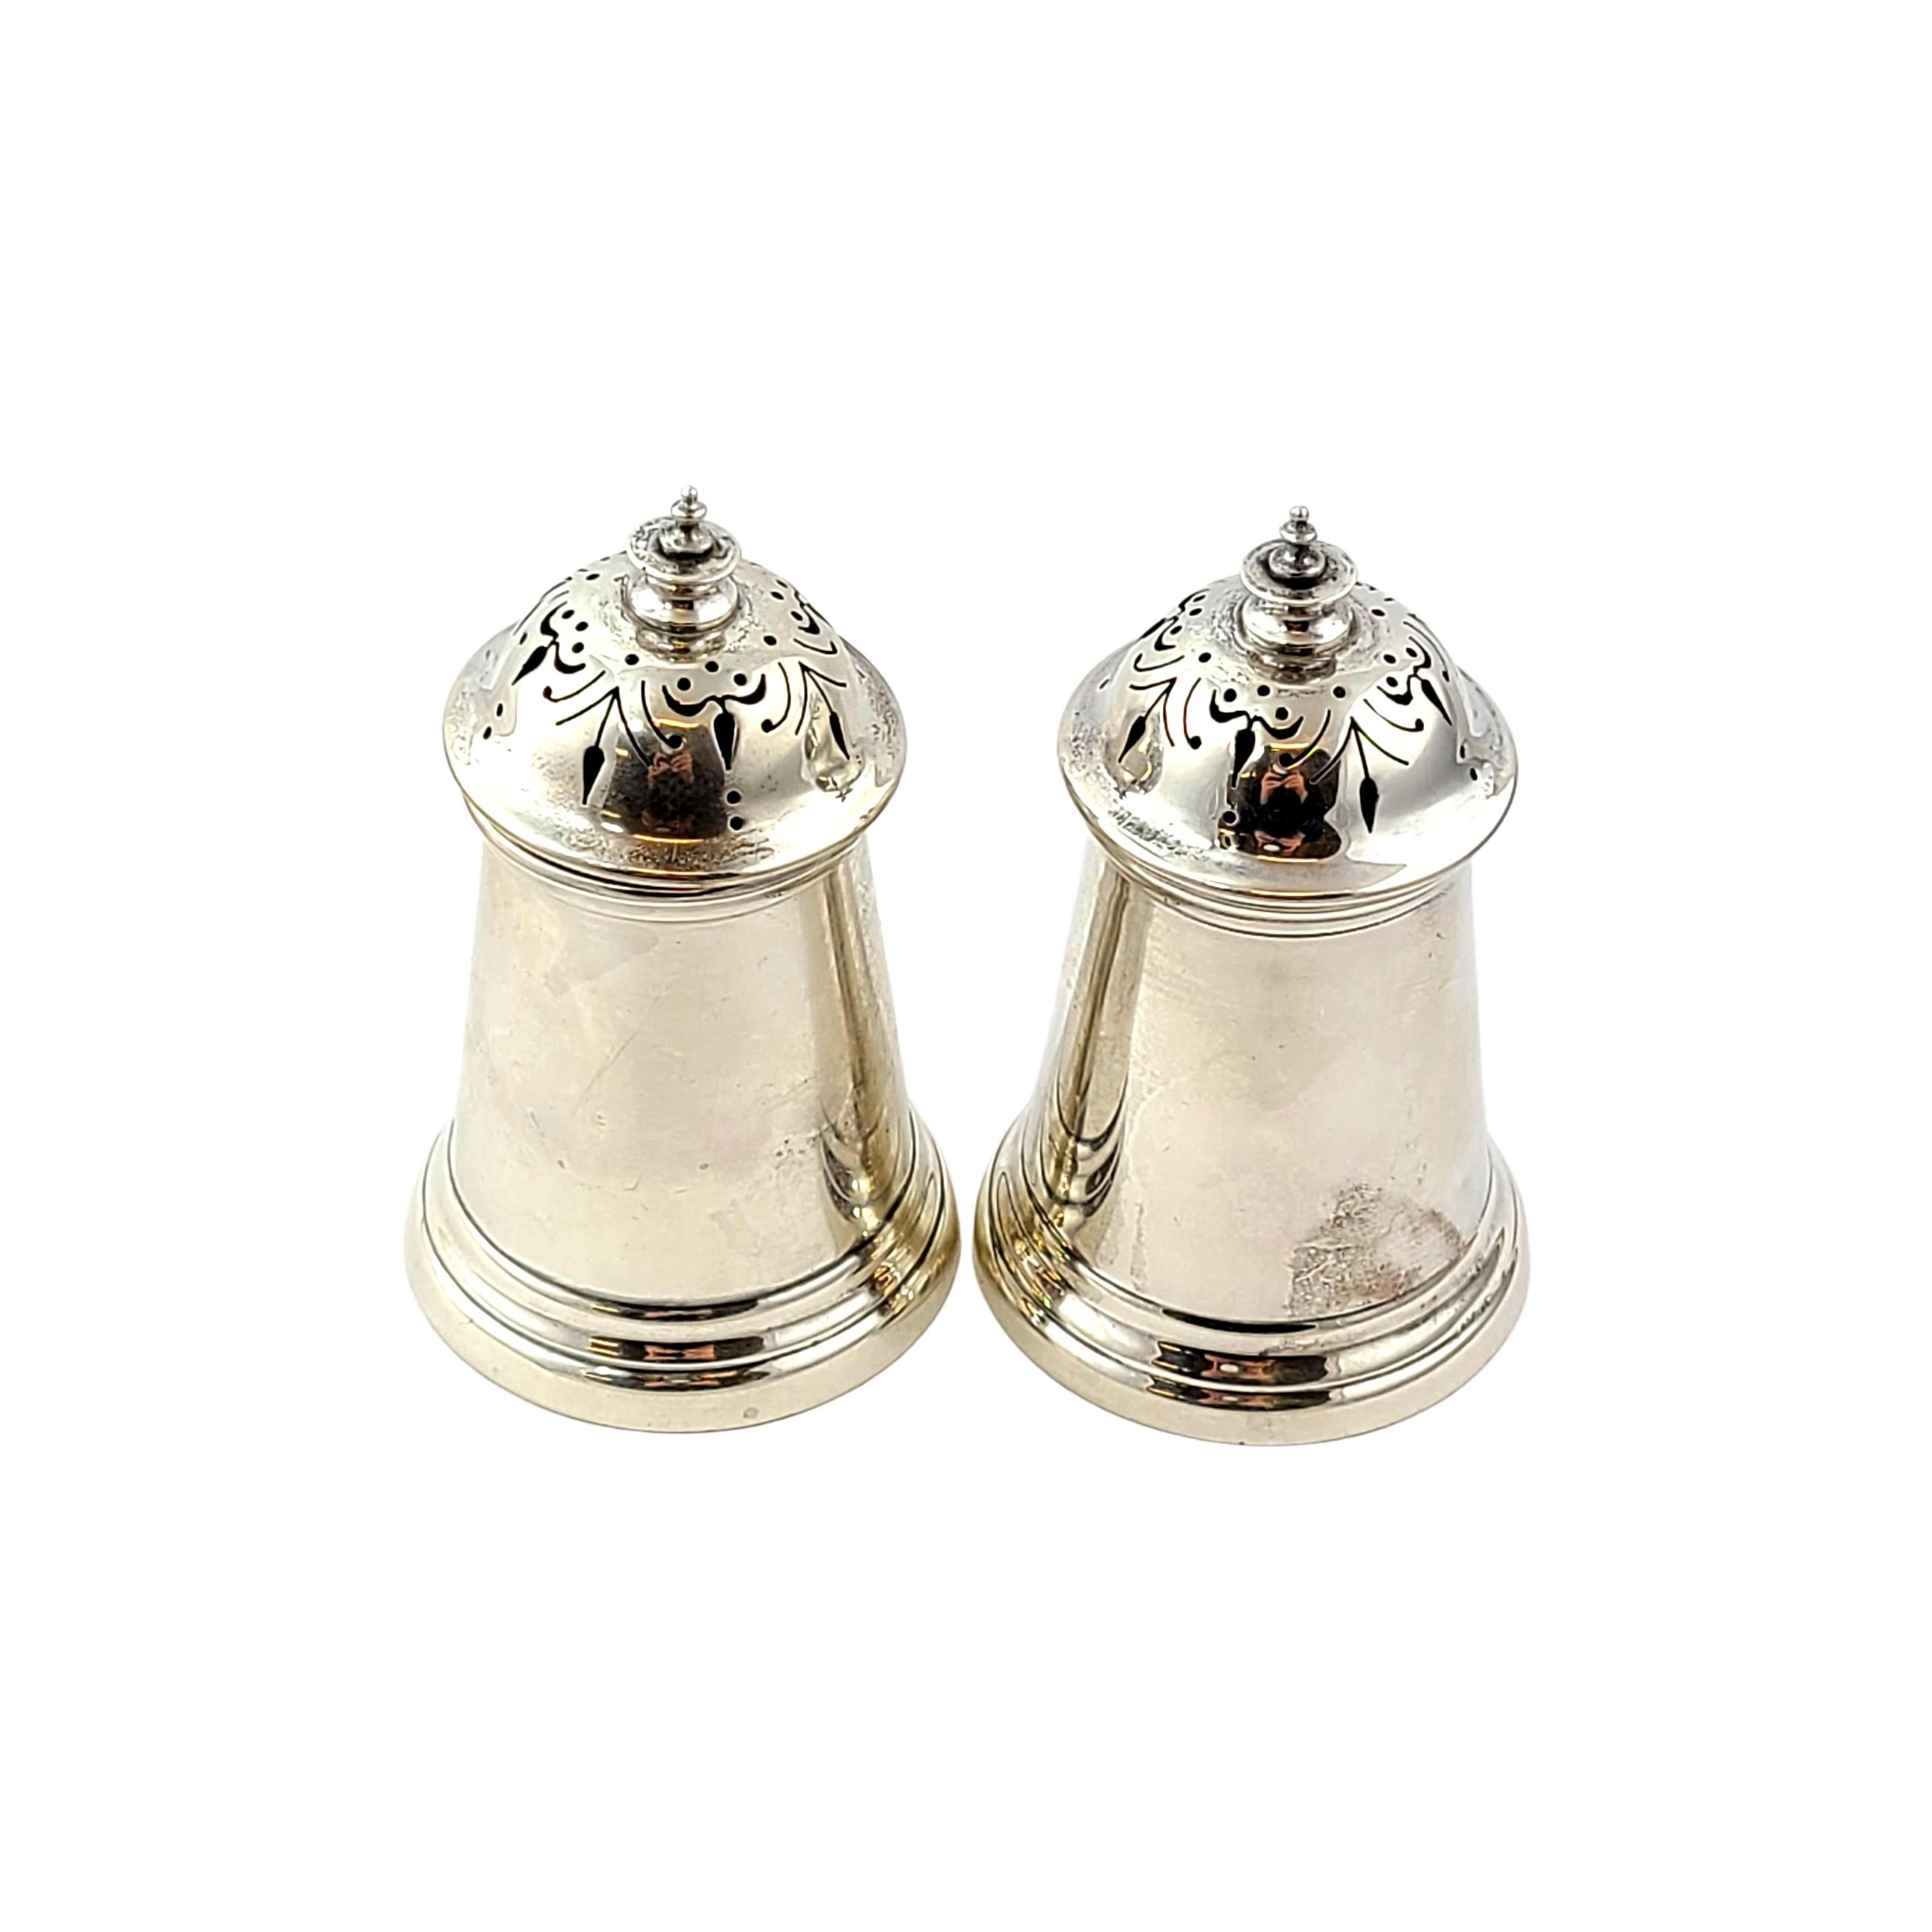 london salt and pepper shakers